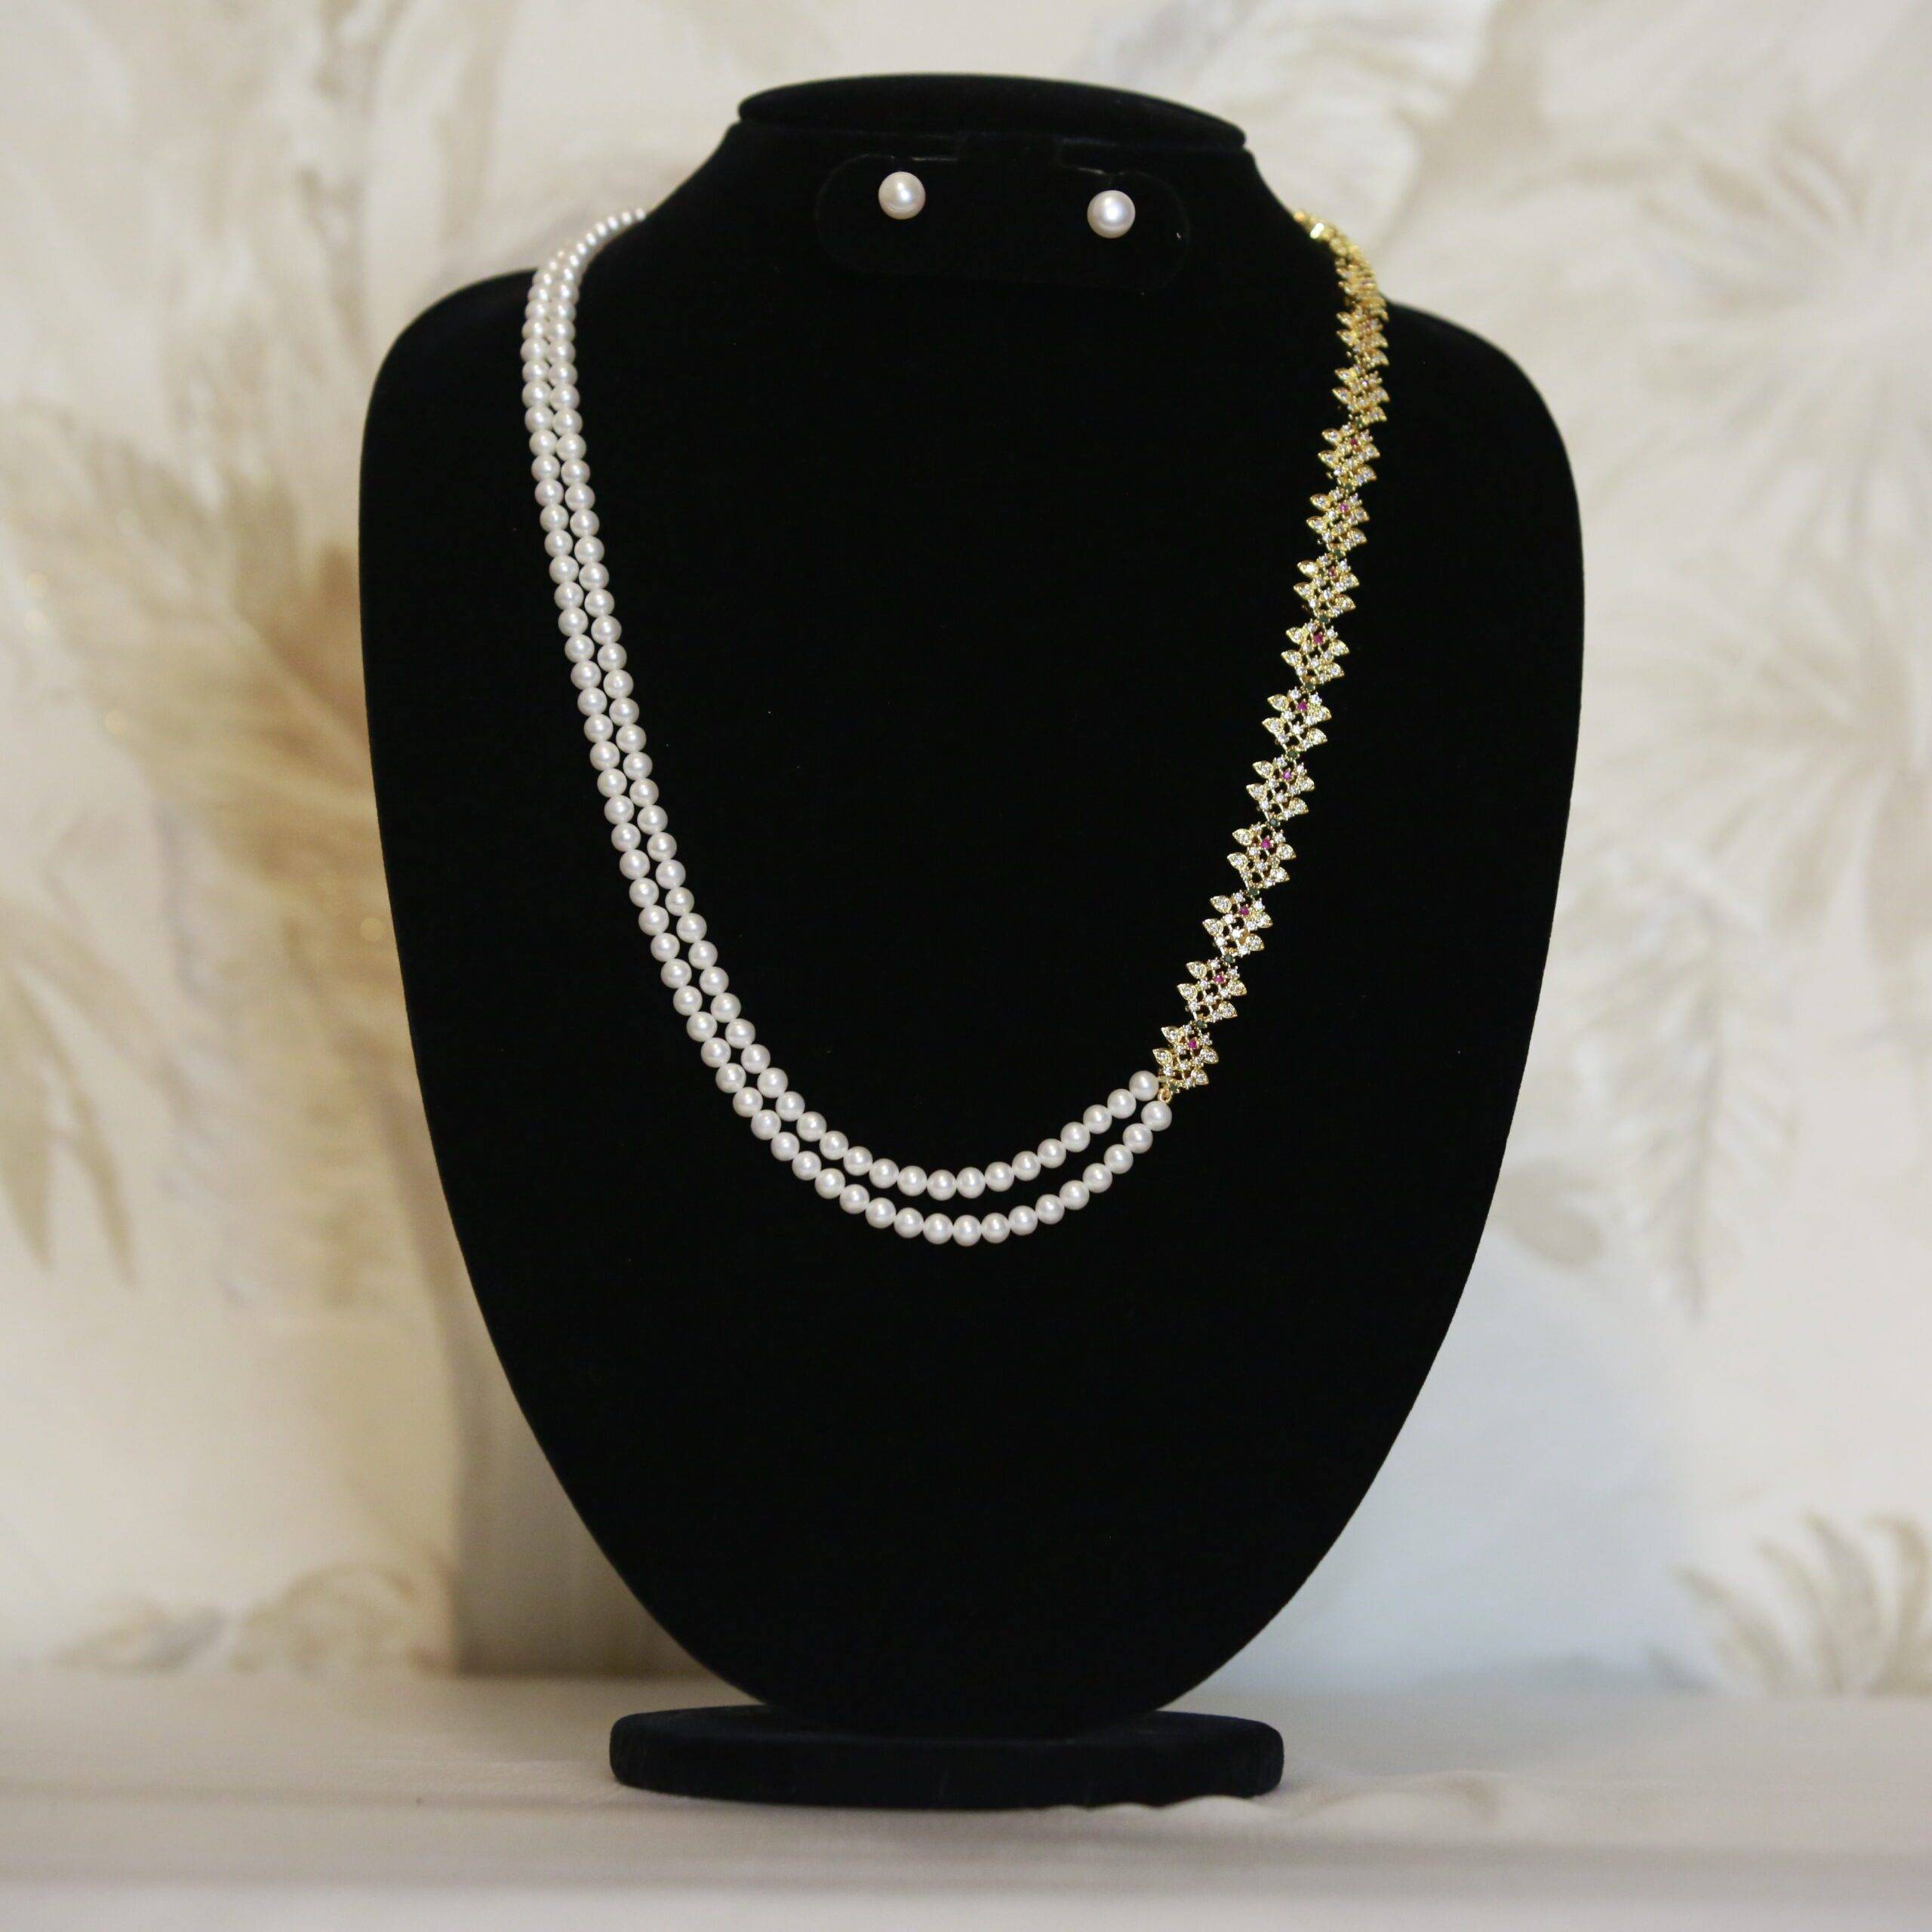 Lot - JAPANESE MIKIMOTO PEARL NECKLACE, a 22 inch strand